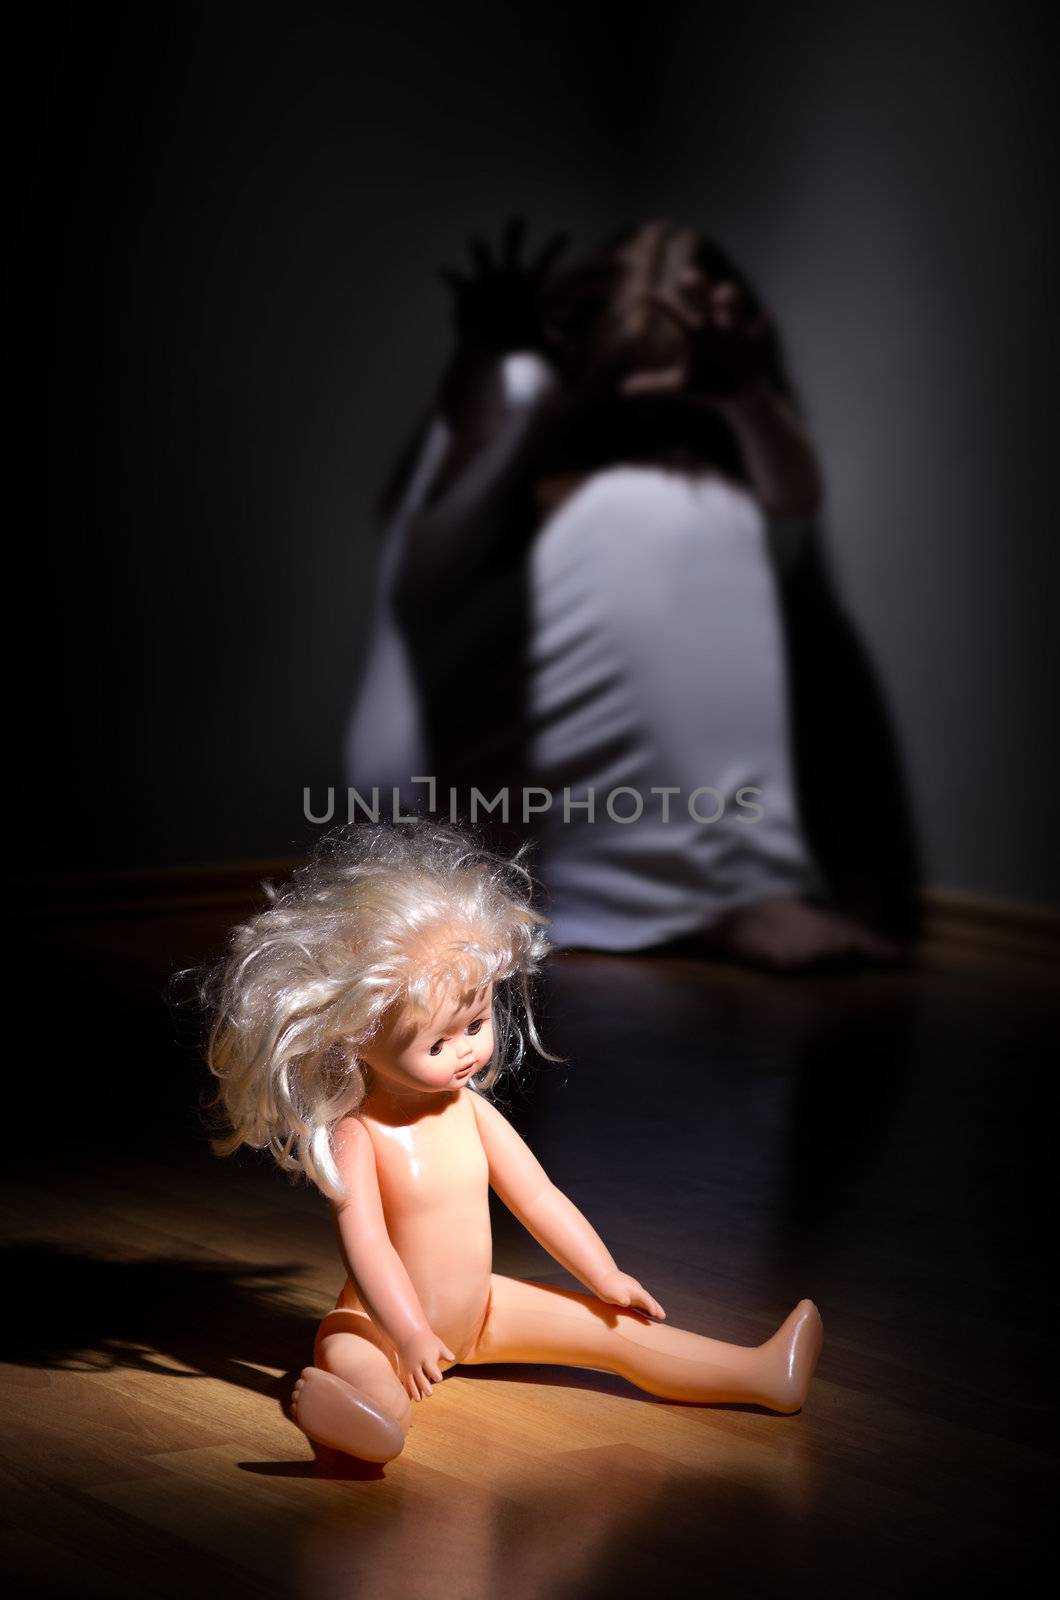 Crazy girl and doll by rbv